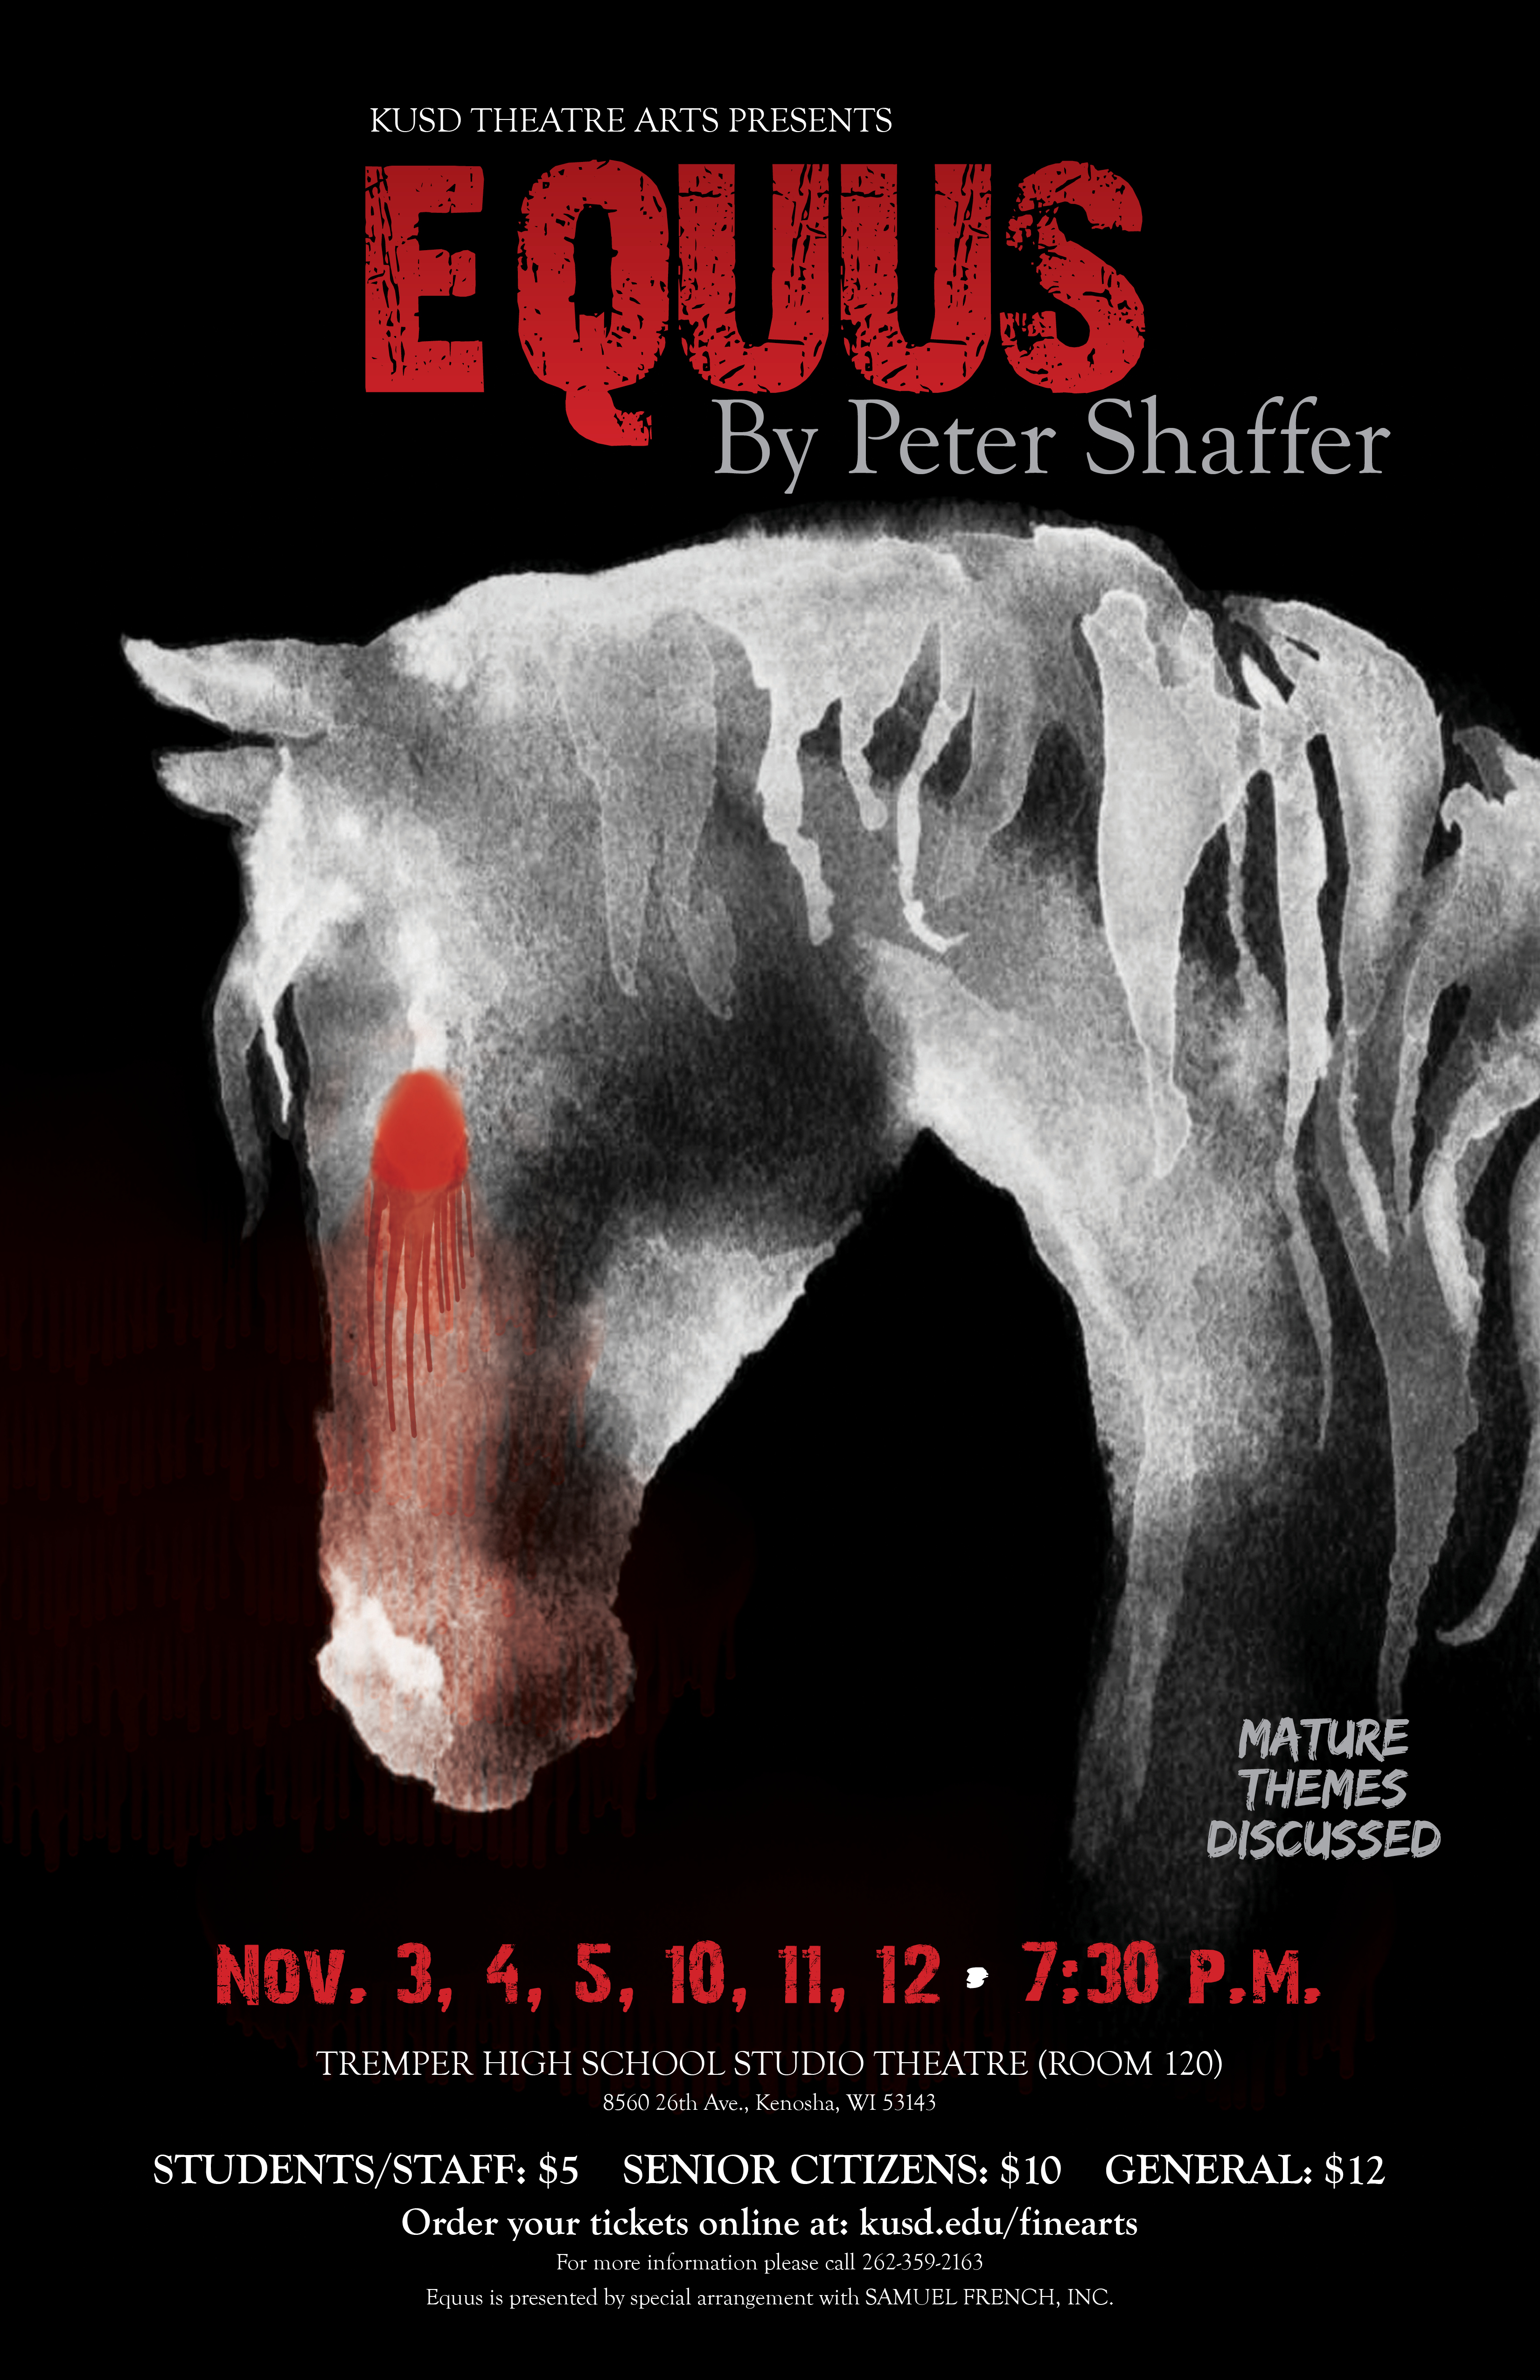 The poster for Equus